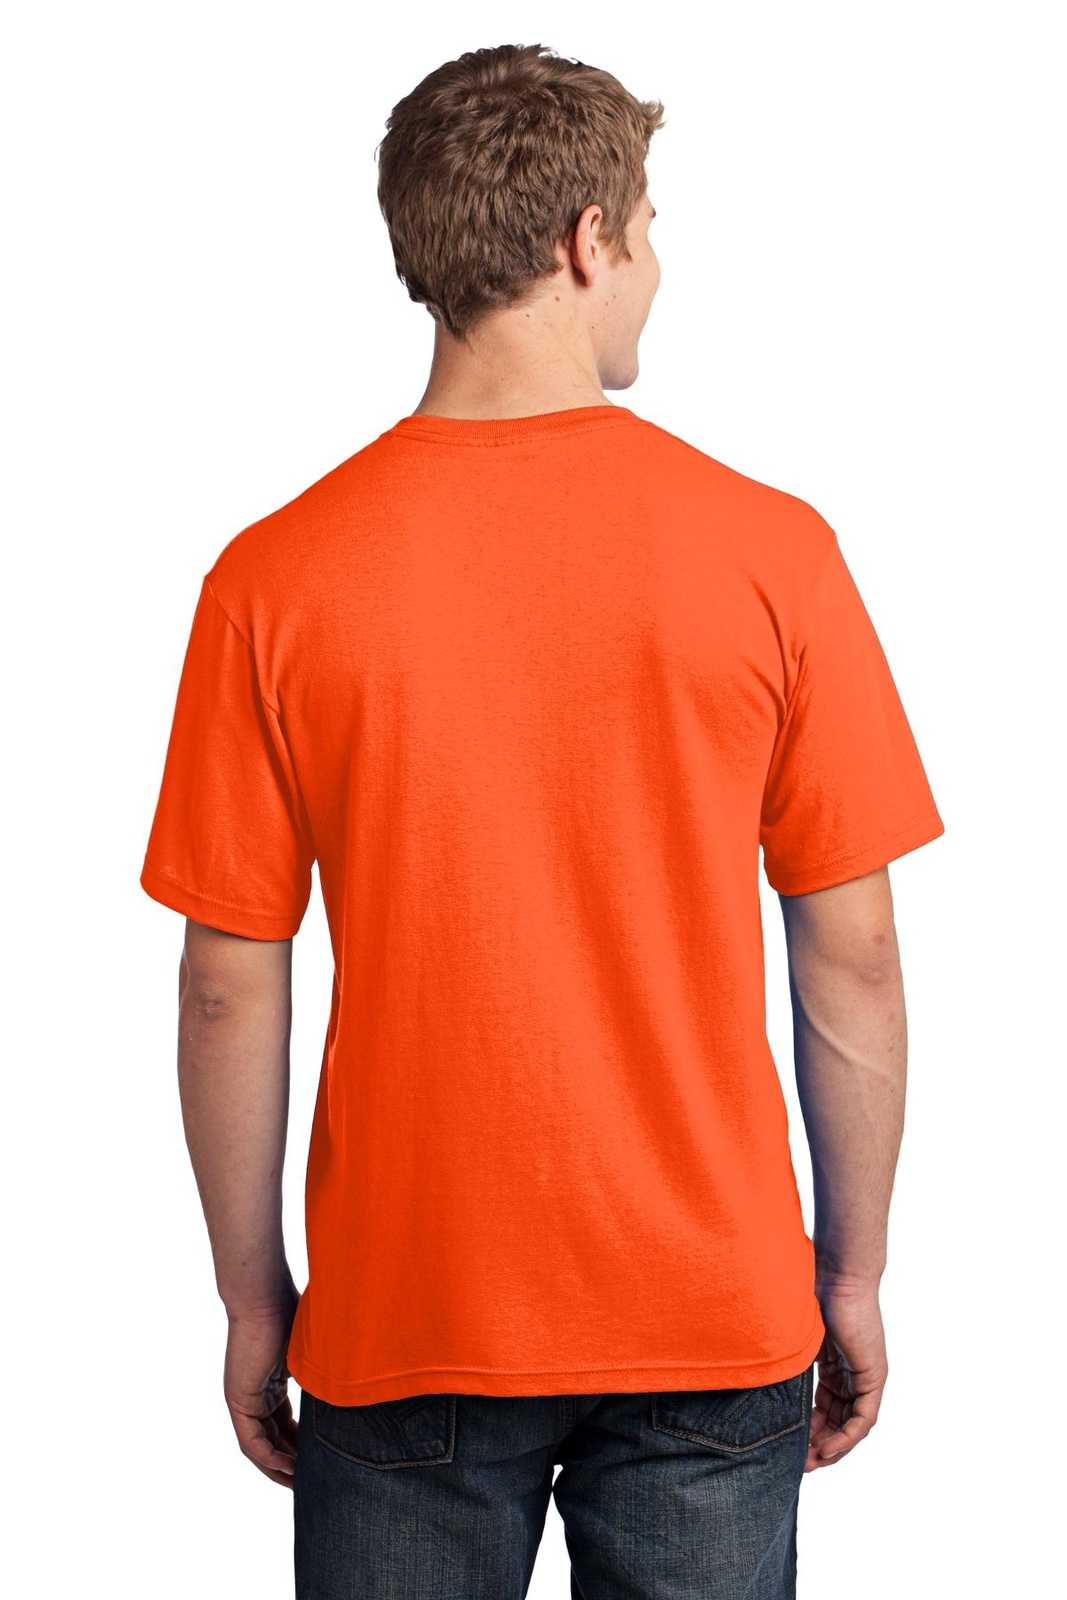 Port &amp; Company USA100 All-American Tee - Safety Orange - HIT a Double - 2